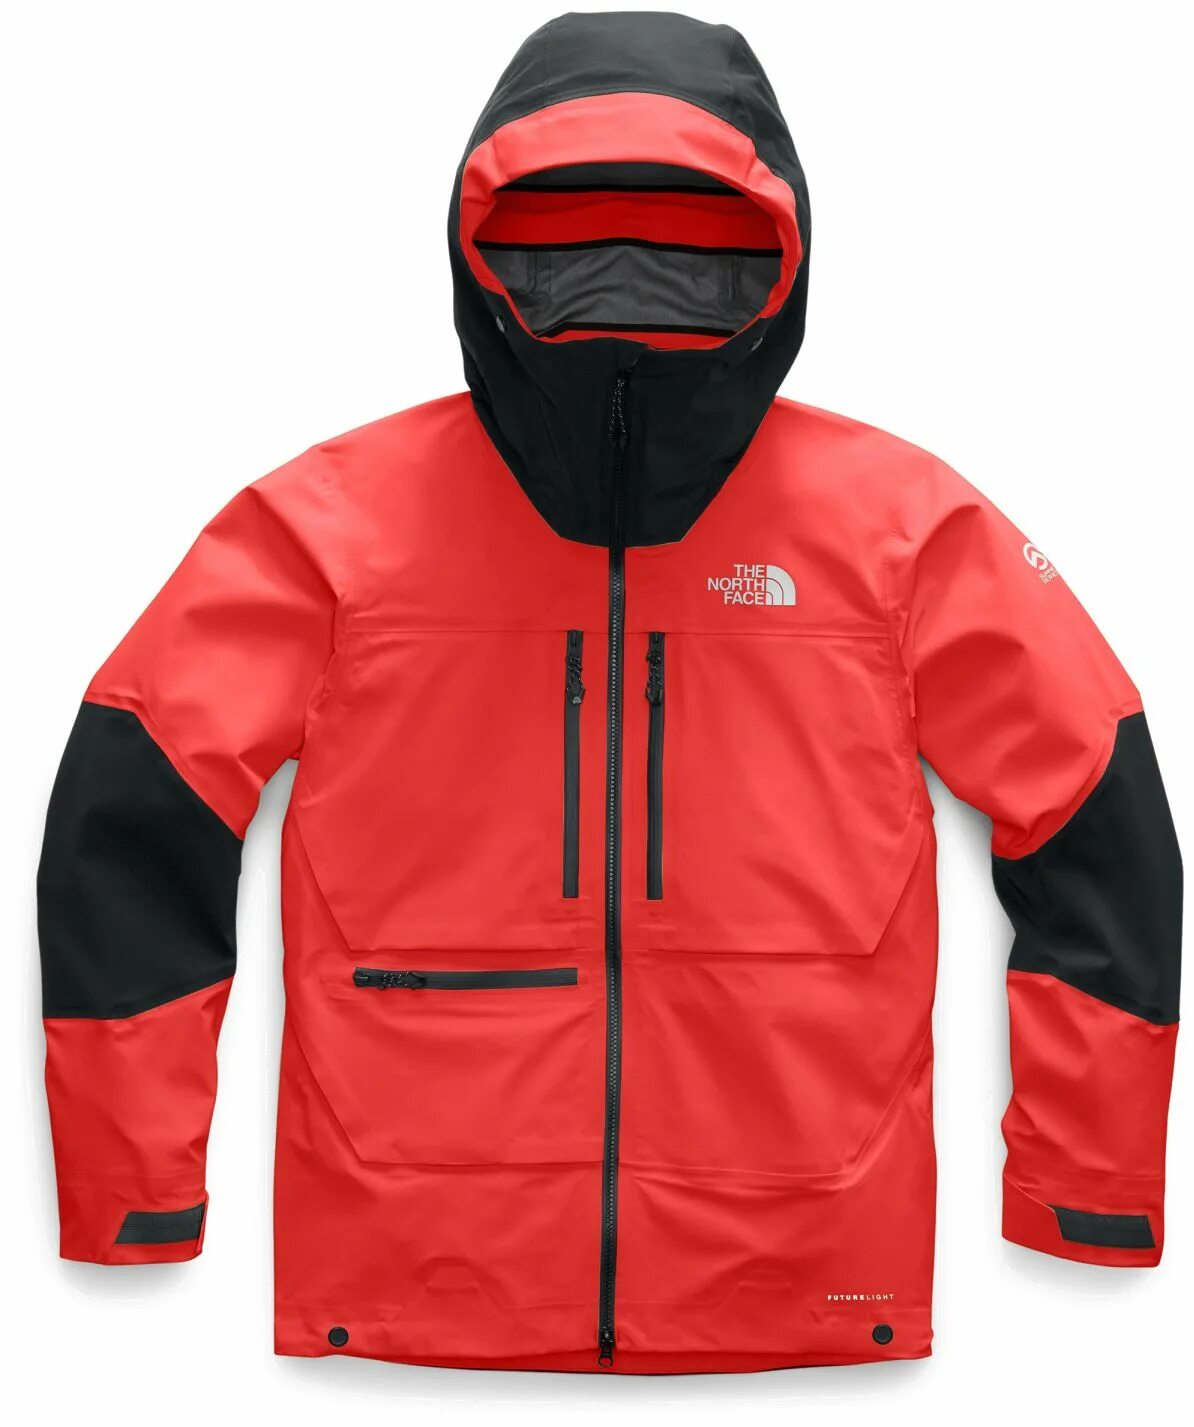 The north face summit series. The North face Summit Series куртки. The North face Summit Series l5. Куртка мужская the North face Summit l5 Futurelight Red Orange. Summit Series l5.